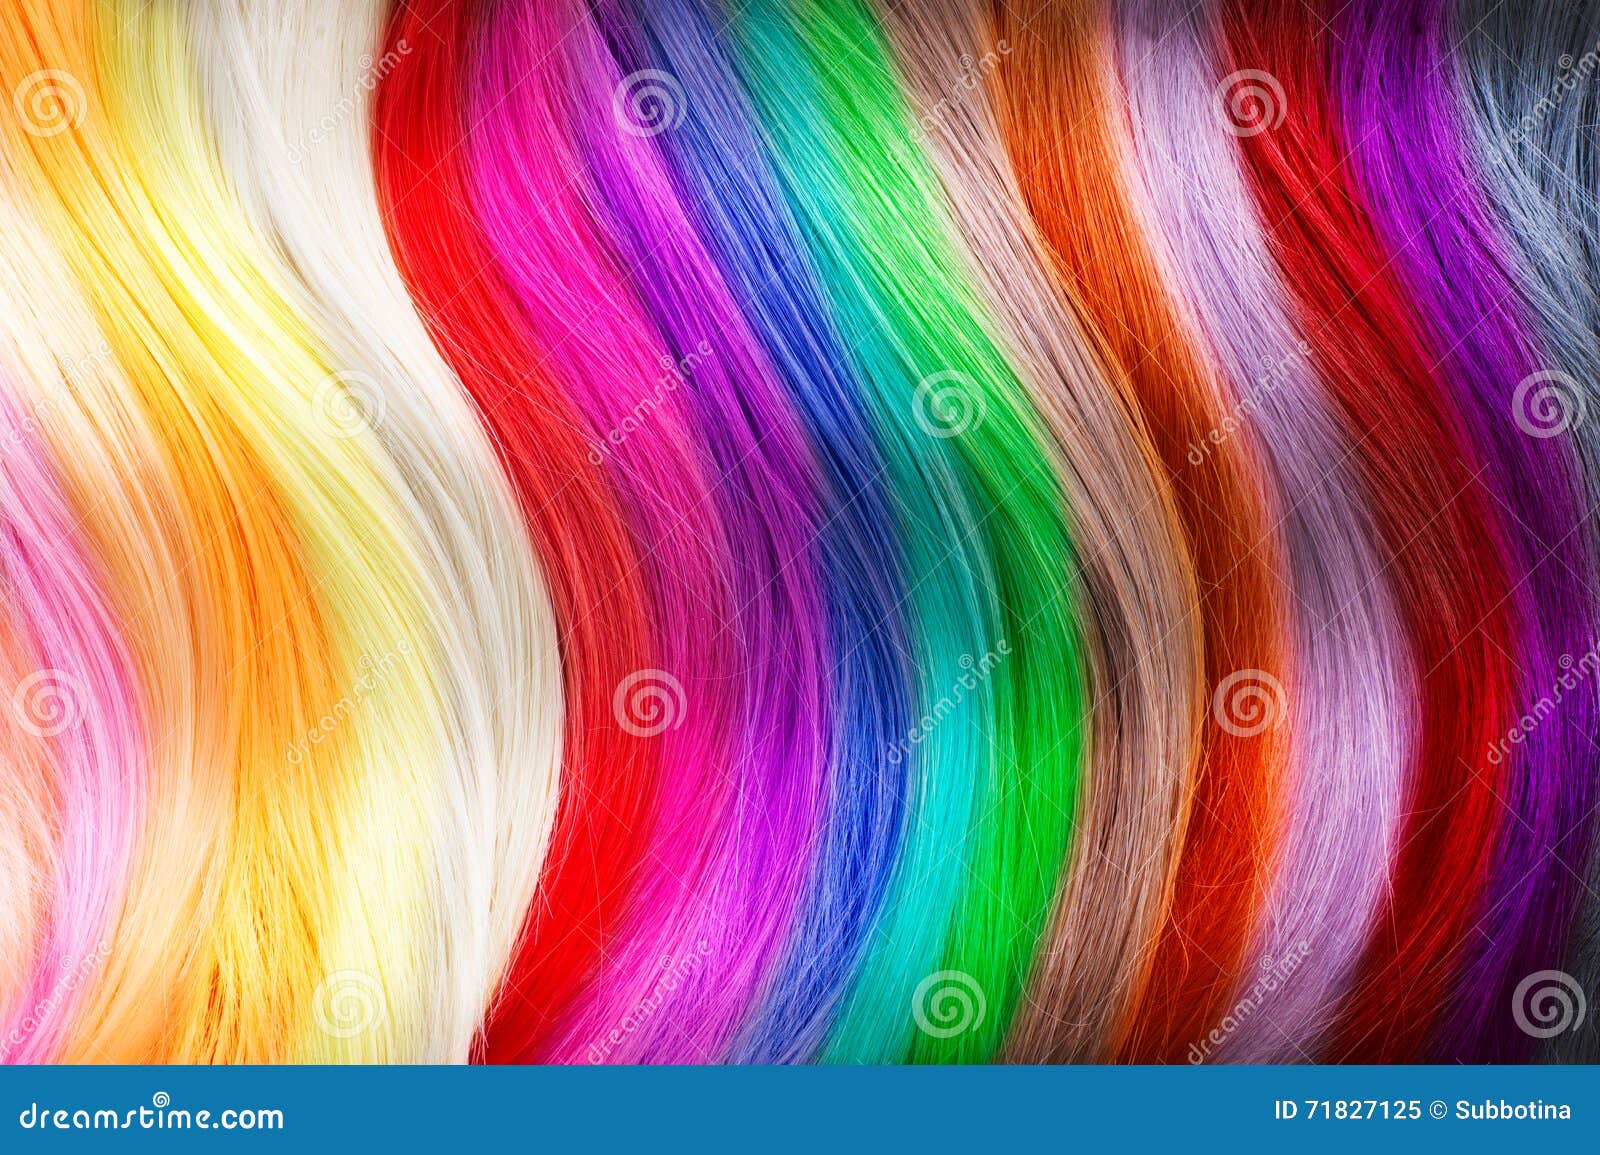 hair colors palette. dyed hair colors